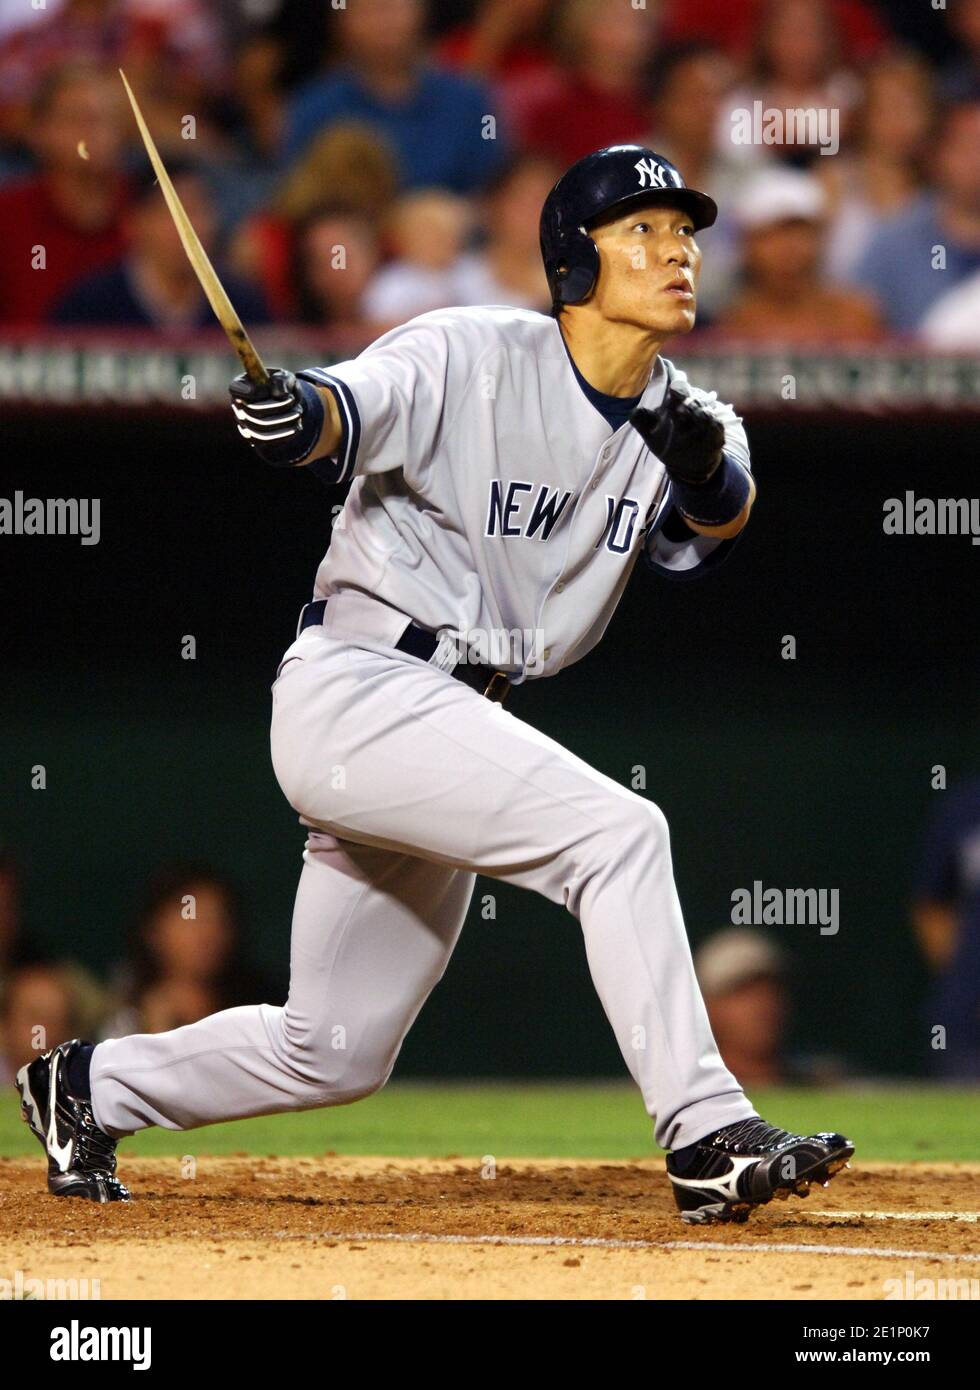 Hideki Matsui of the New York Yankees shatters bats during 8-6 loss to the Los Angeles Angels of Anaheim at Angel Stadium in Anaheim, Calif. on Saturd Stock Photo